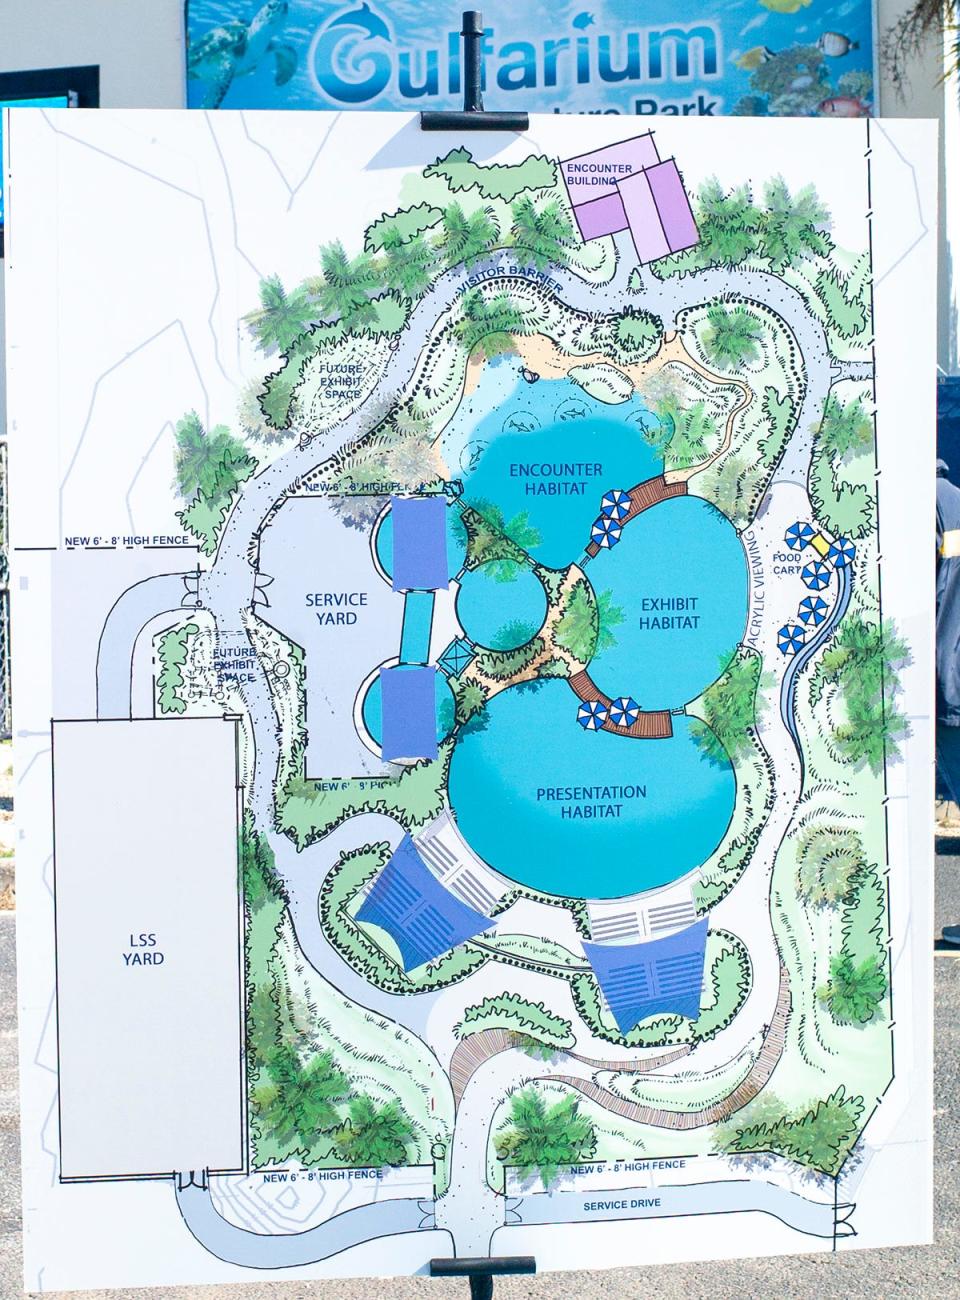 A map shows the intended expansion and integration of the Dolphin Oasis area during a groundbreaking ceremony at the Gulfarium Marine Adventure Park on Okaloosa Island.